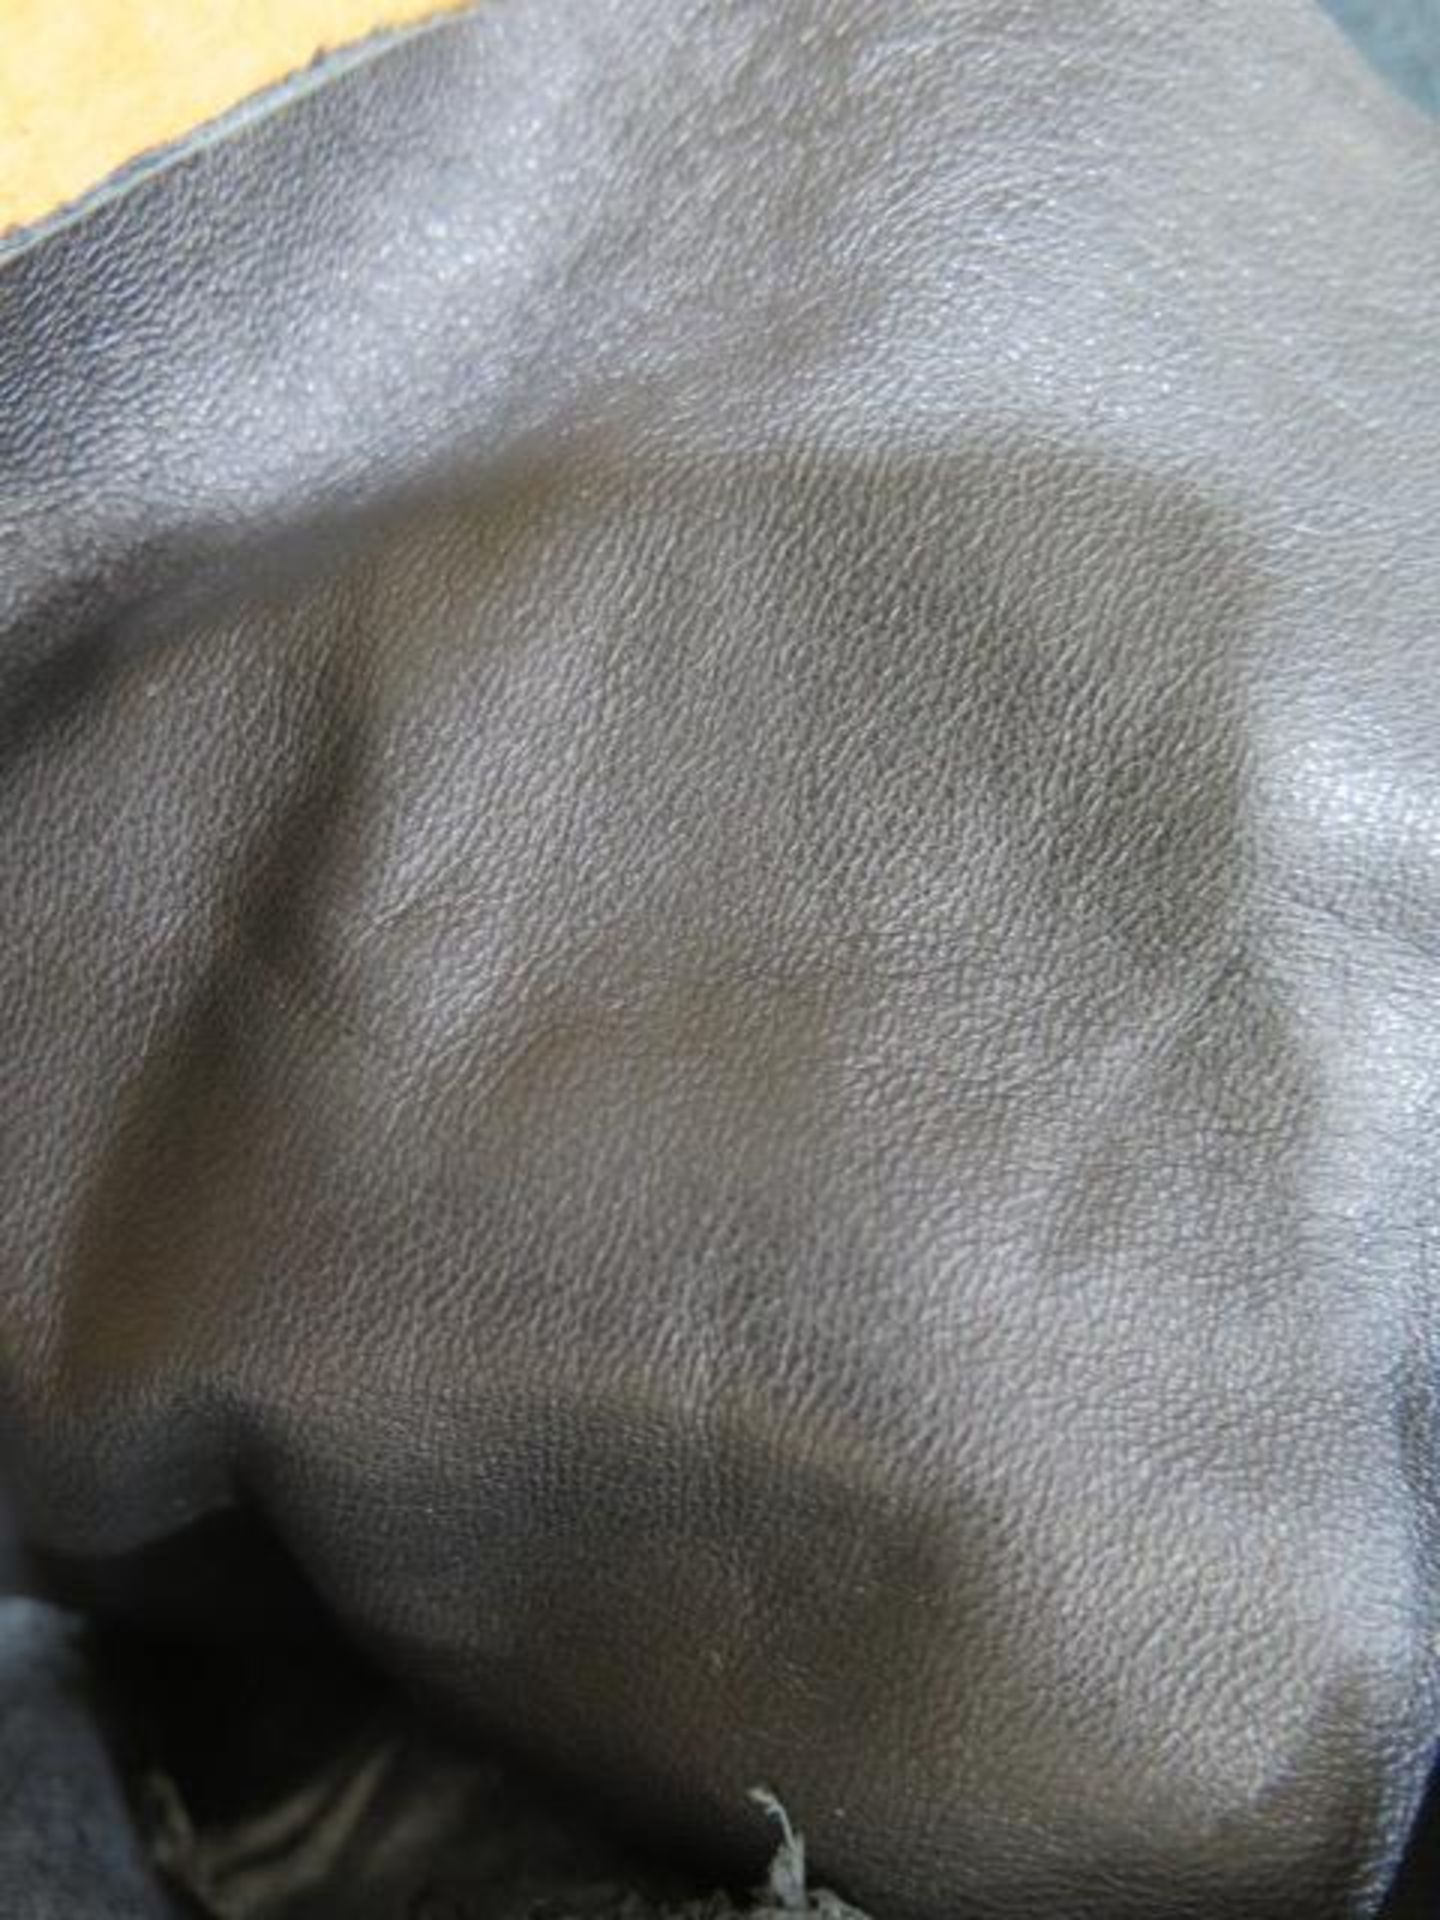 Leather Lamb Skin, Black, 4500 Sq/Ft (SOLD AS-IS - NO WARRANTY) - Image 6 of 8